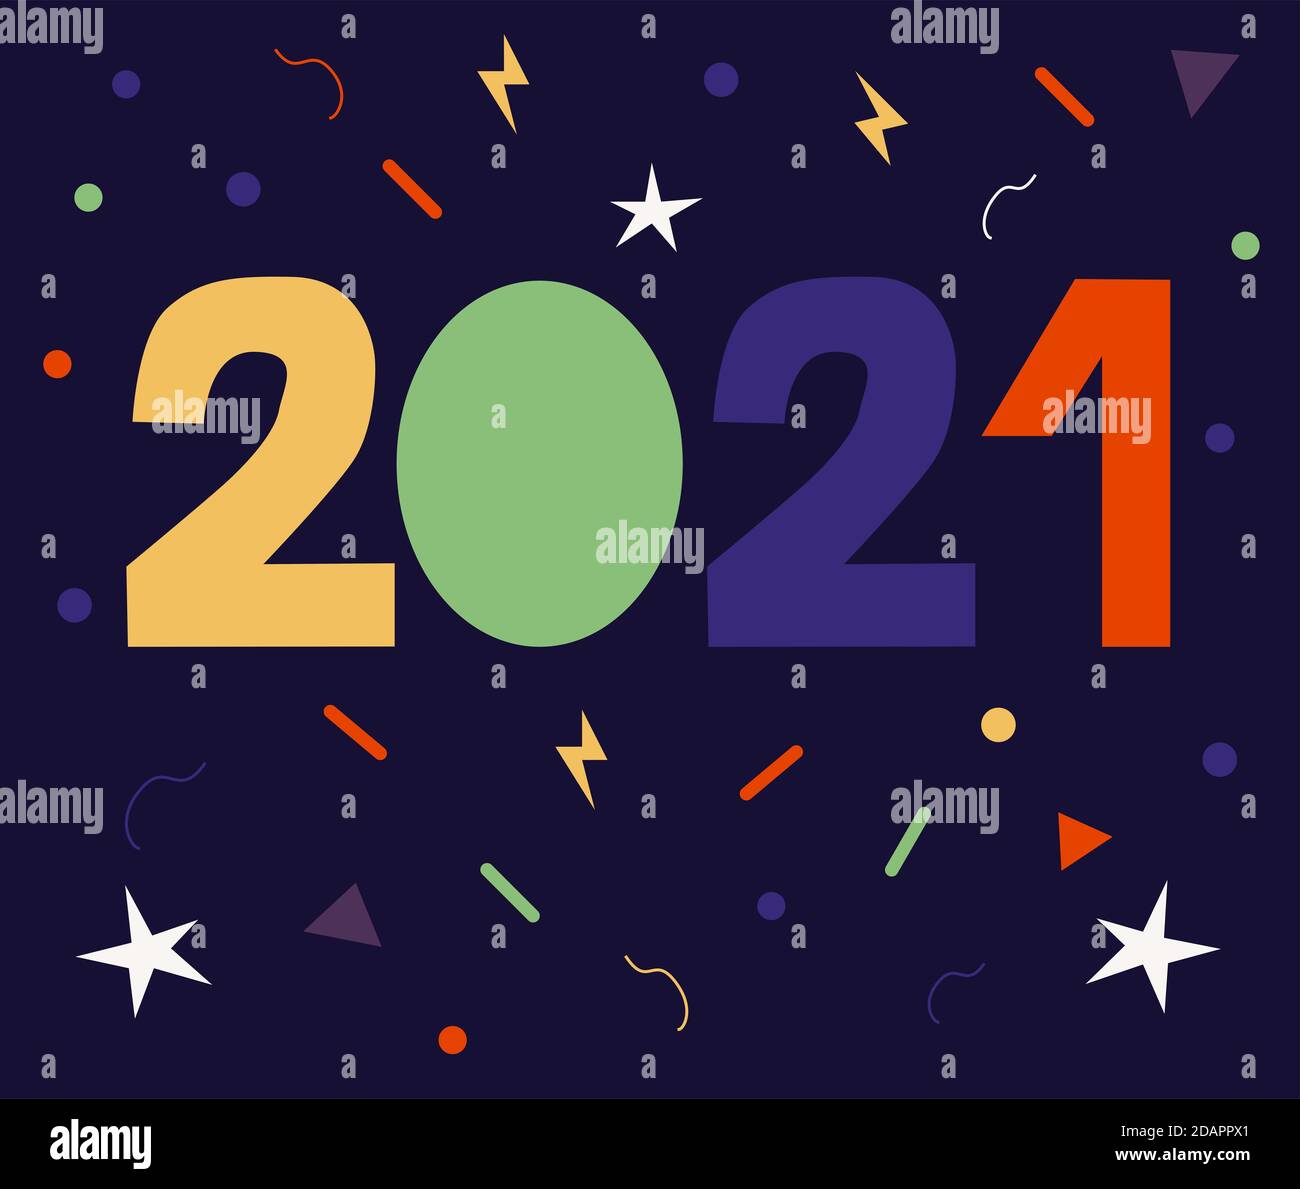 Illustration of background or postal card for 2021 New Years celebration Stock Photo